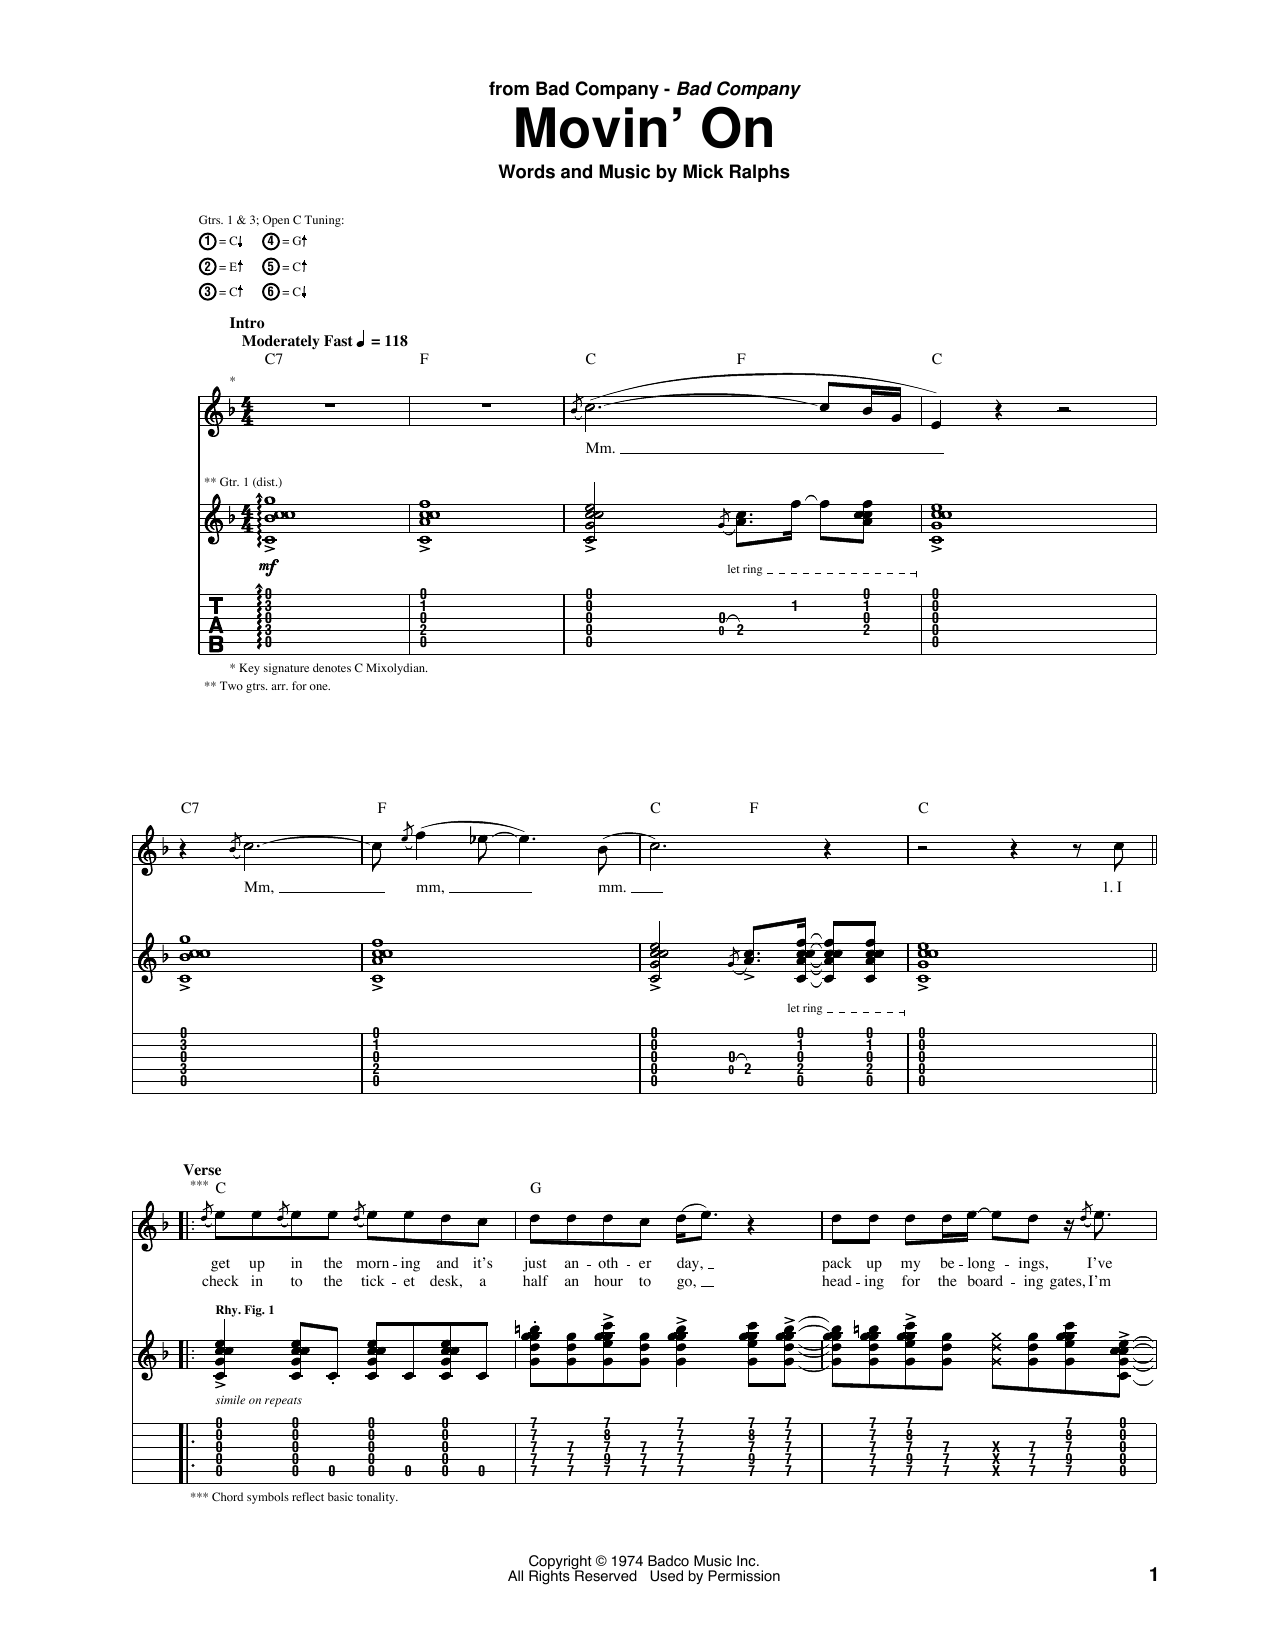 Download Bad Company Movin' On Sheet Music